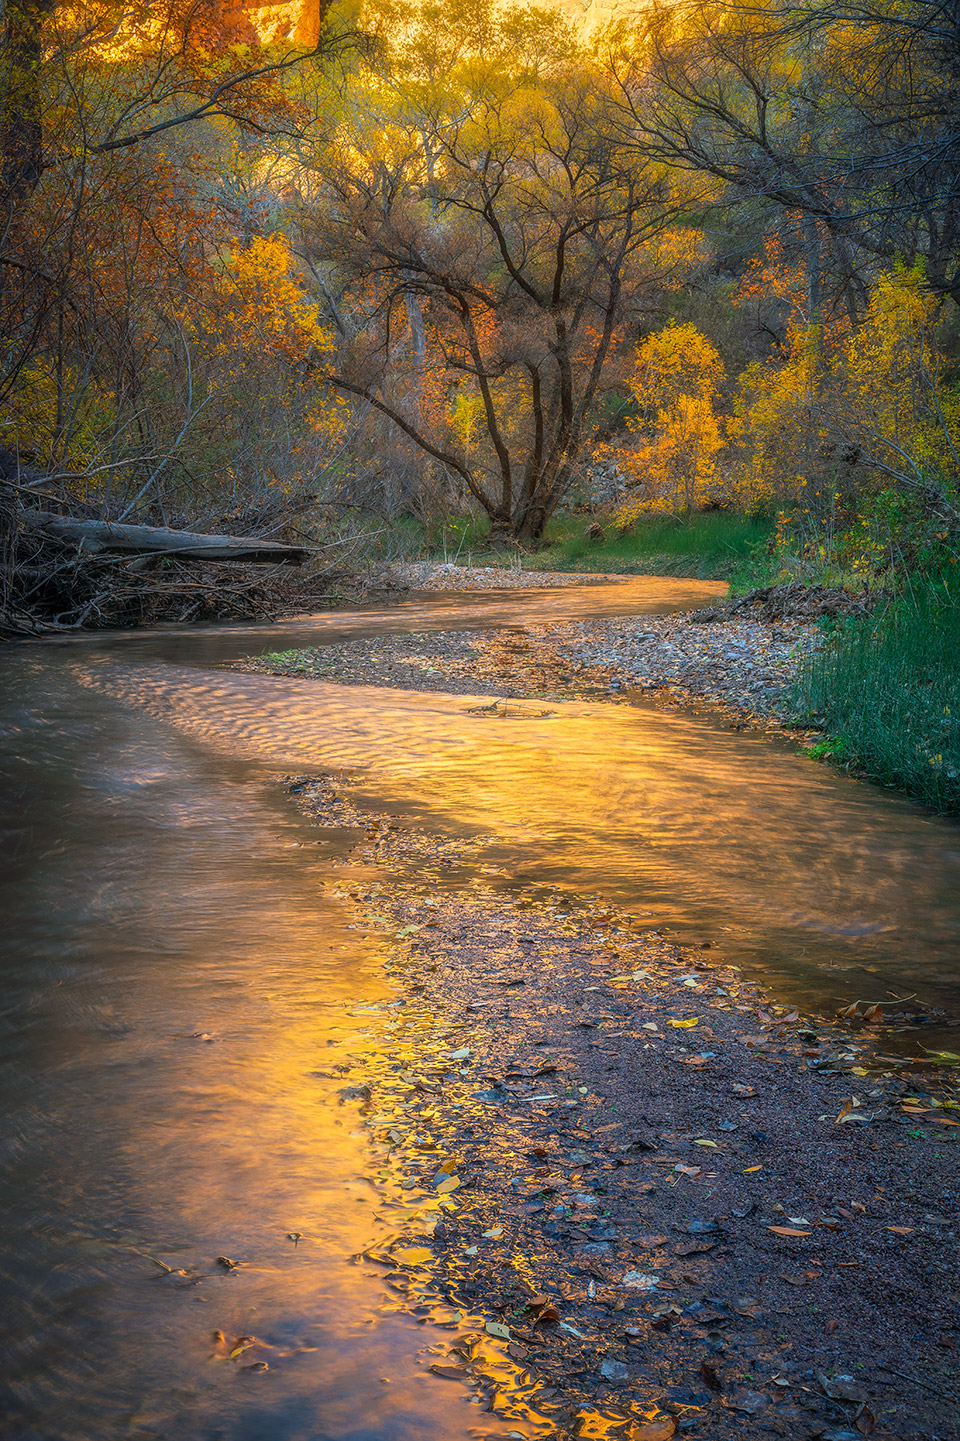 Photograph by Peter Coskun